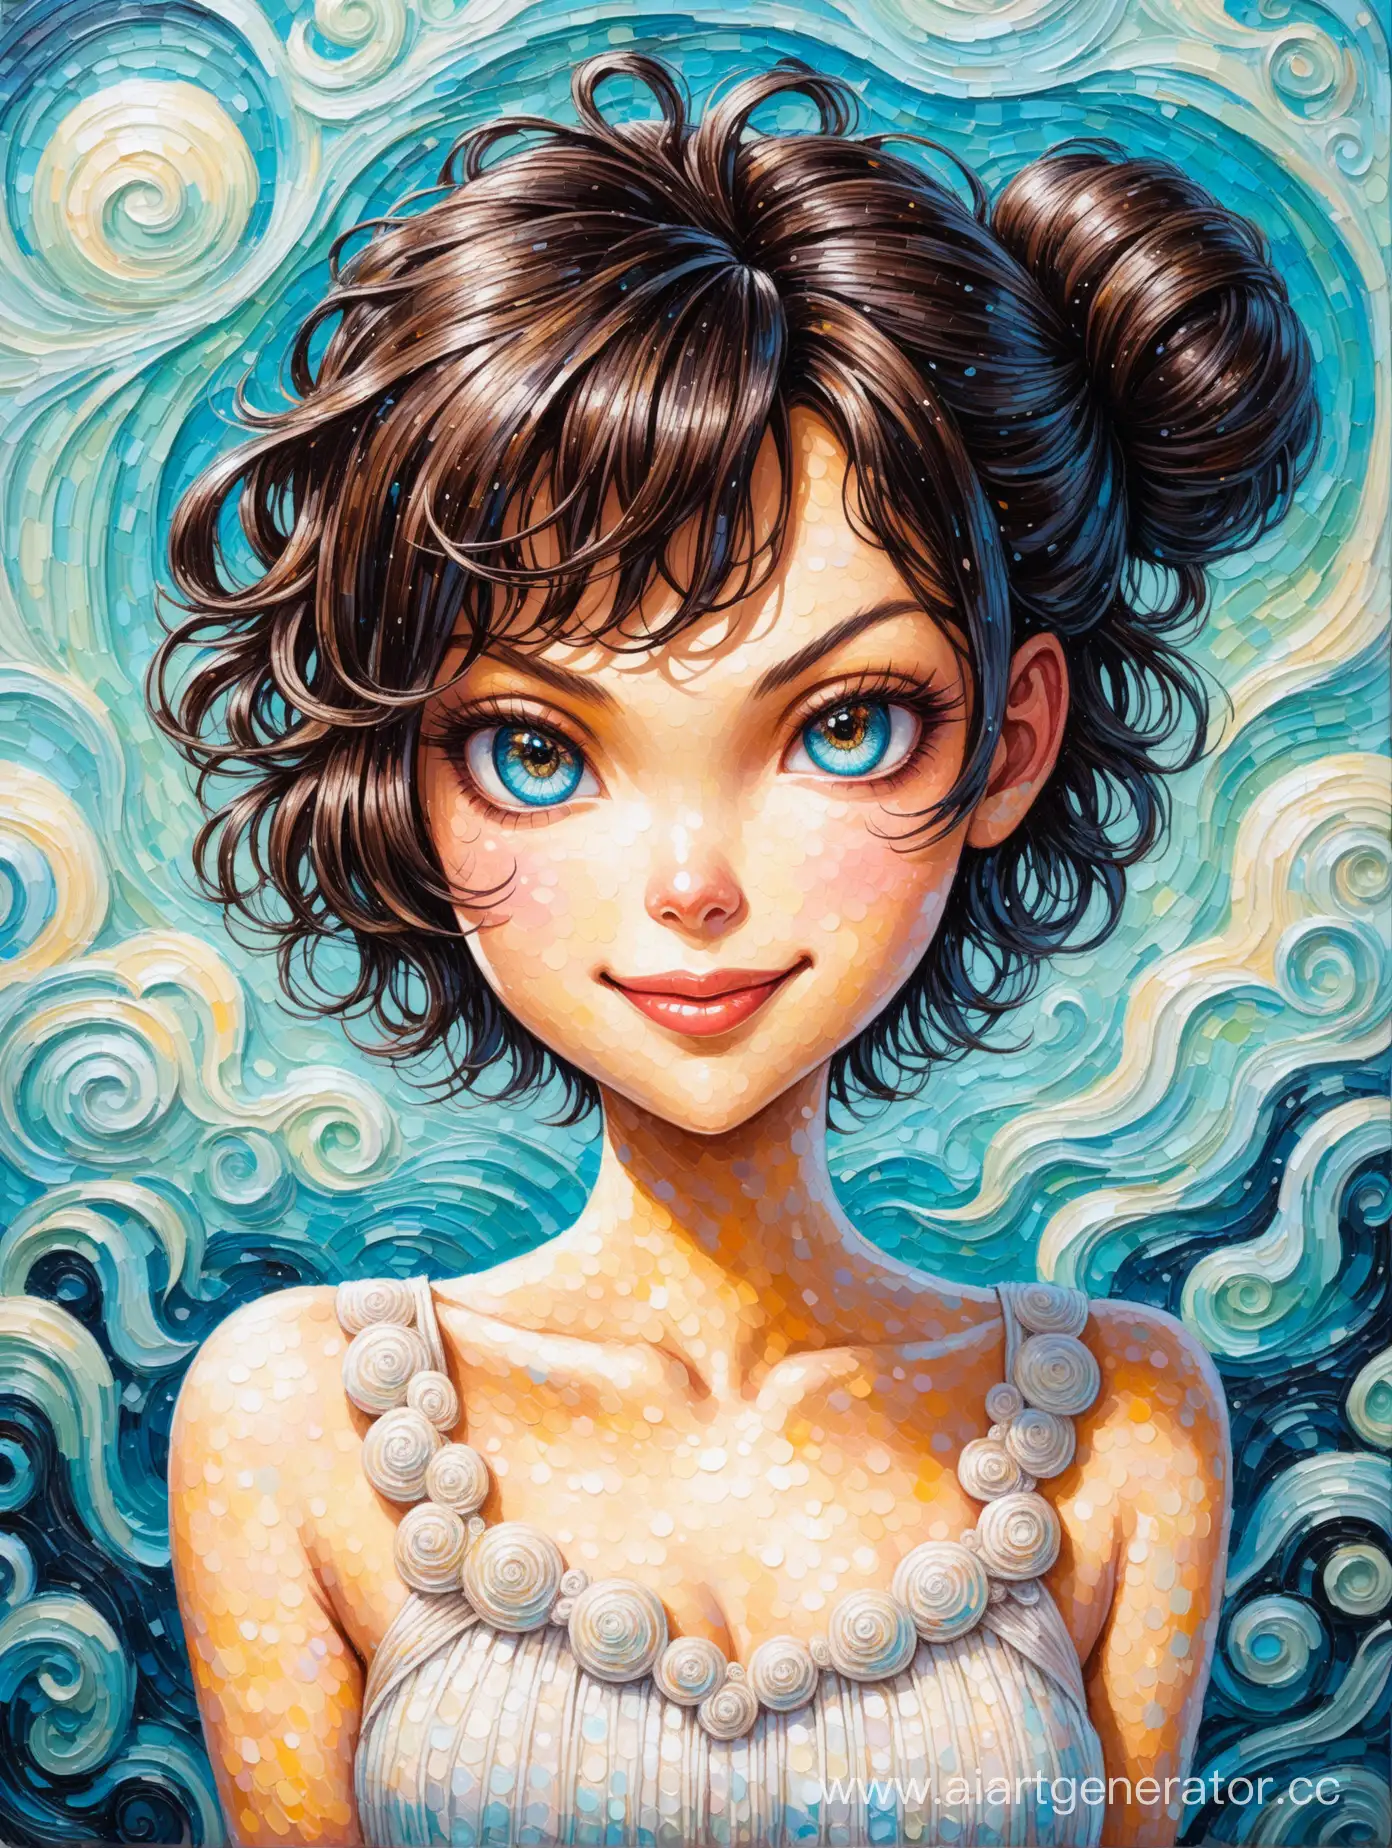 Surreal-Impasto-Oil-Painting-Smiling-Dreamy-Girl-in-Tim-Burton-Comic-Style